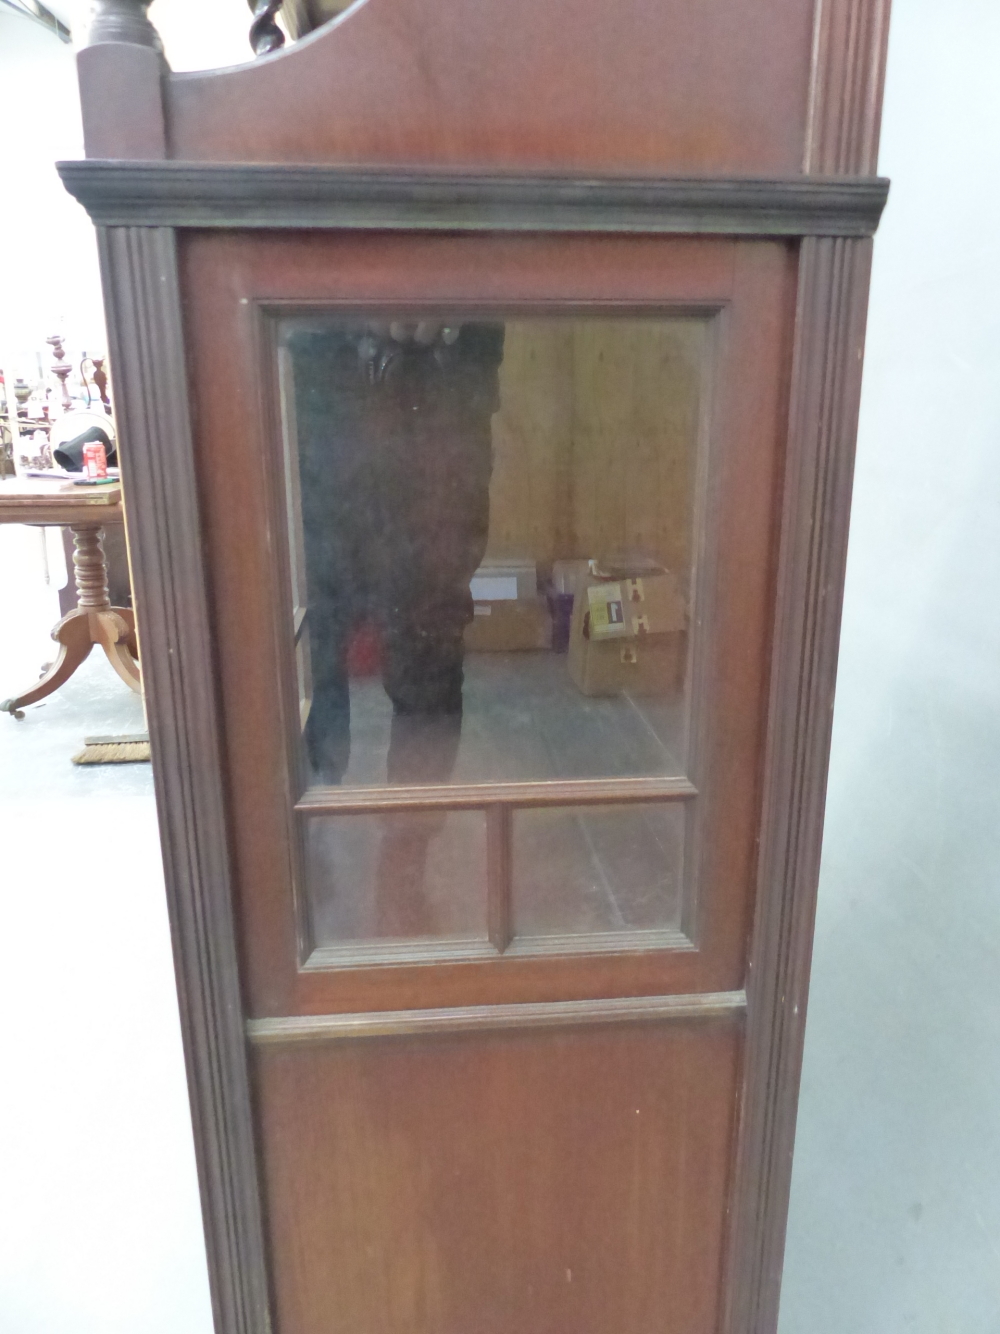 AN ARTS AND CRAFTS MORRIS STYLE MAHOGANY DISPLAY CABINET, THE TOP SHELF WITH BEVELLED GLASS MIRROR - Image 8 of 12